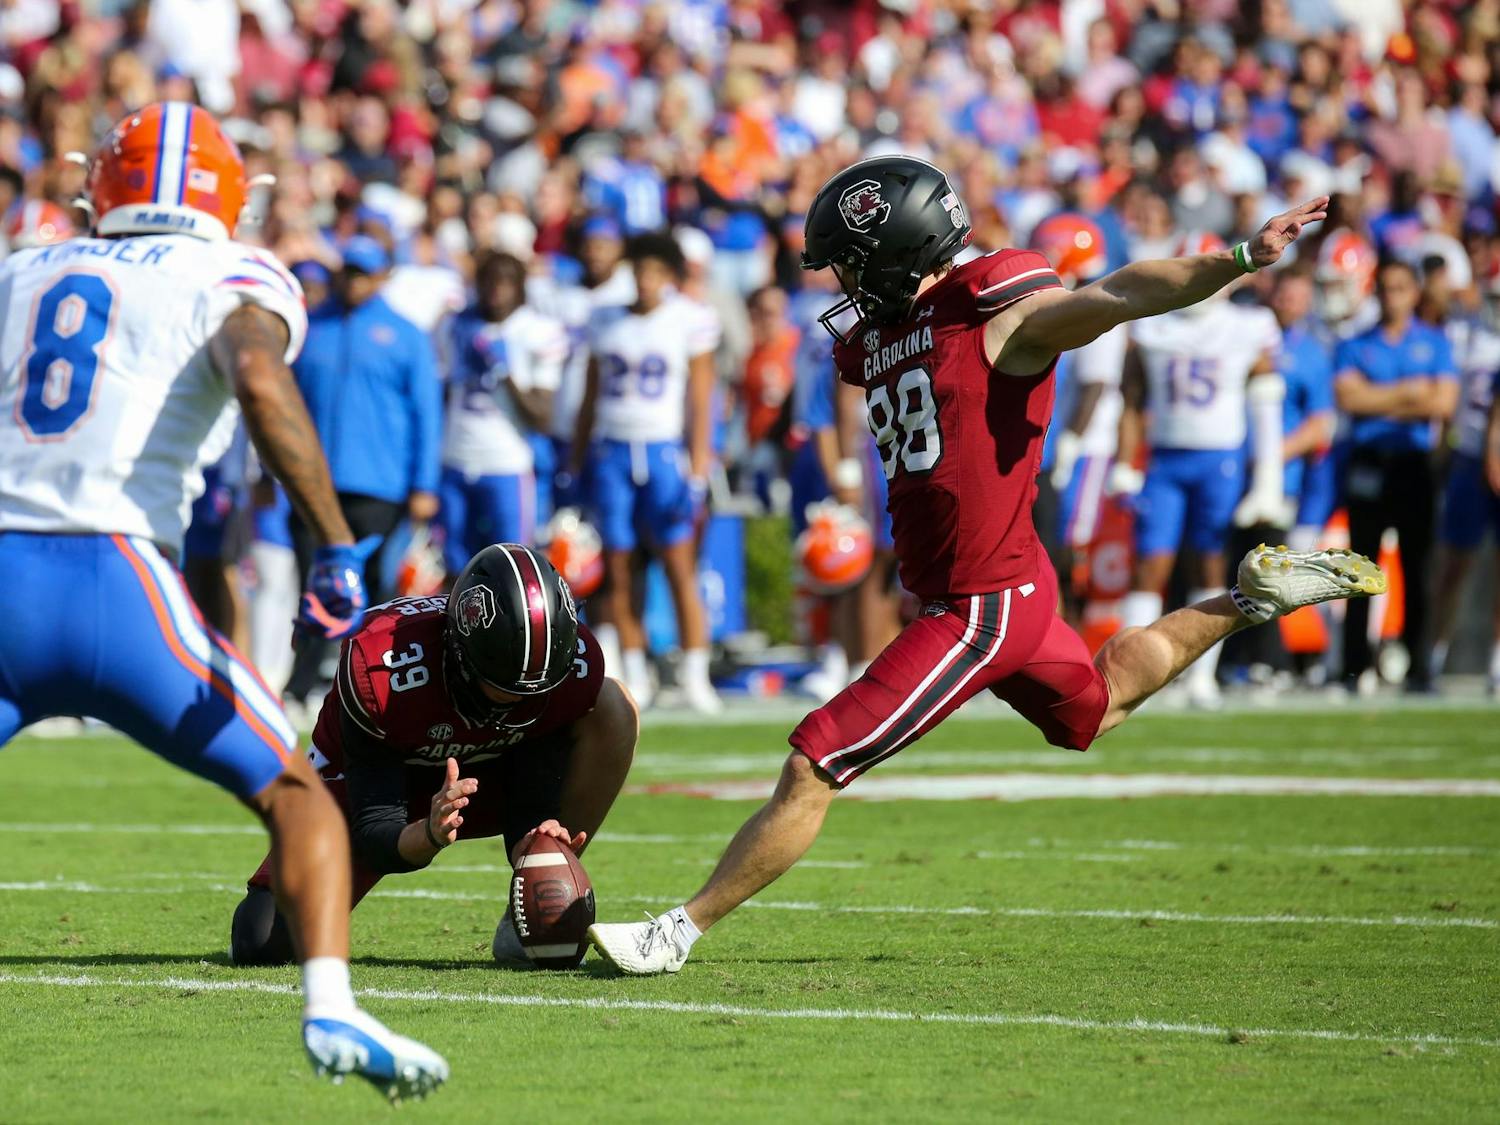 Senior placekicker Mitch Jeter kicks a ball held by senior punter Kai Kroeger after a touchdown during South Carolina’s 41-39 loss to Florida on Oct. 14, 2023 at Williams-Brice Stadium. The Gamecocks finished the 2023 season with a record of 5-7.